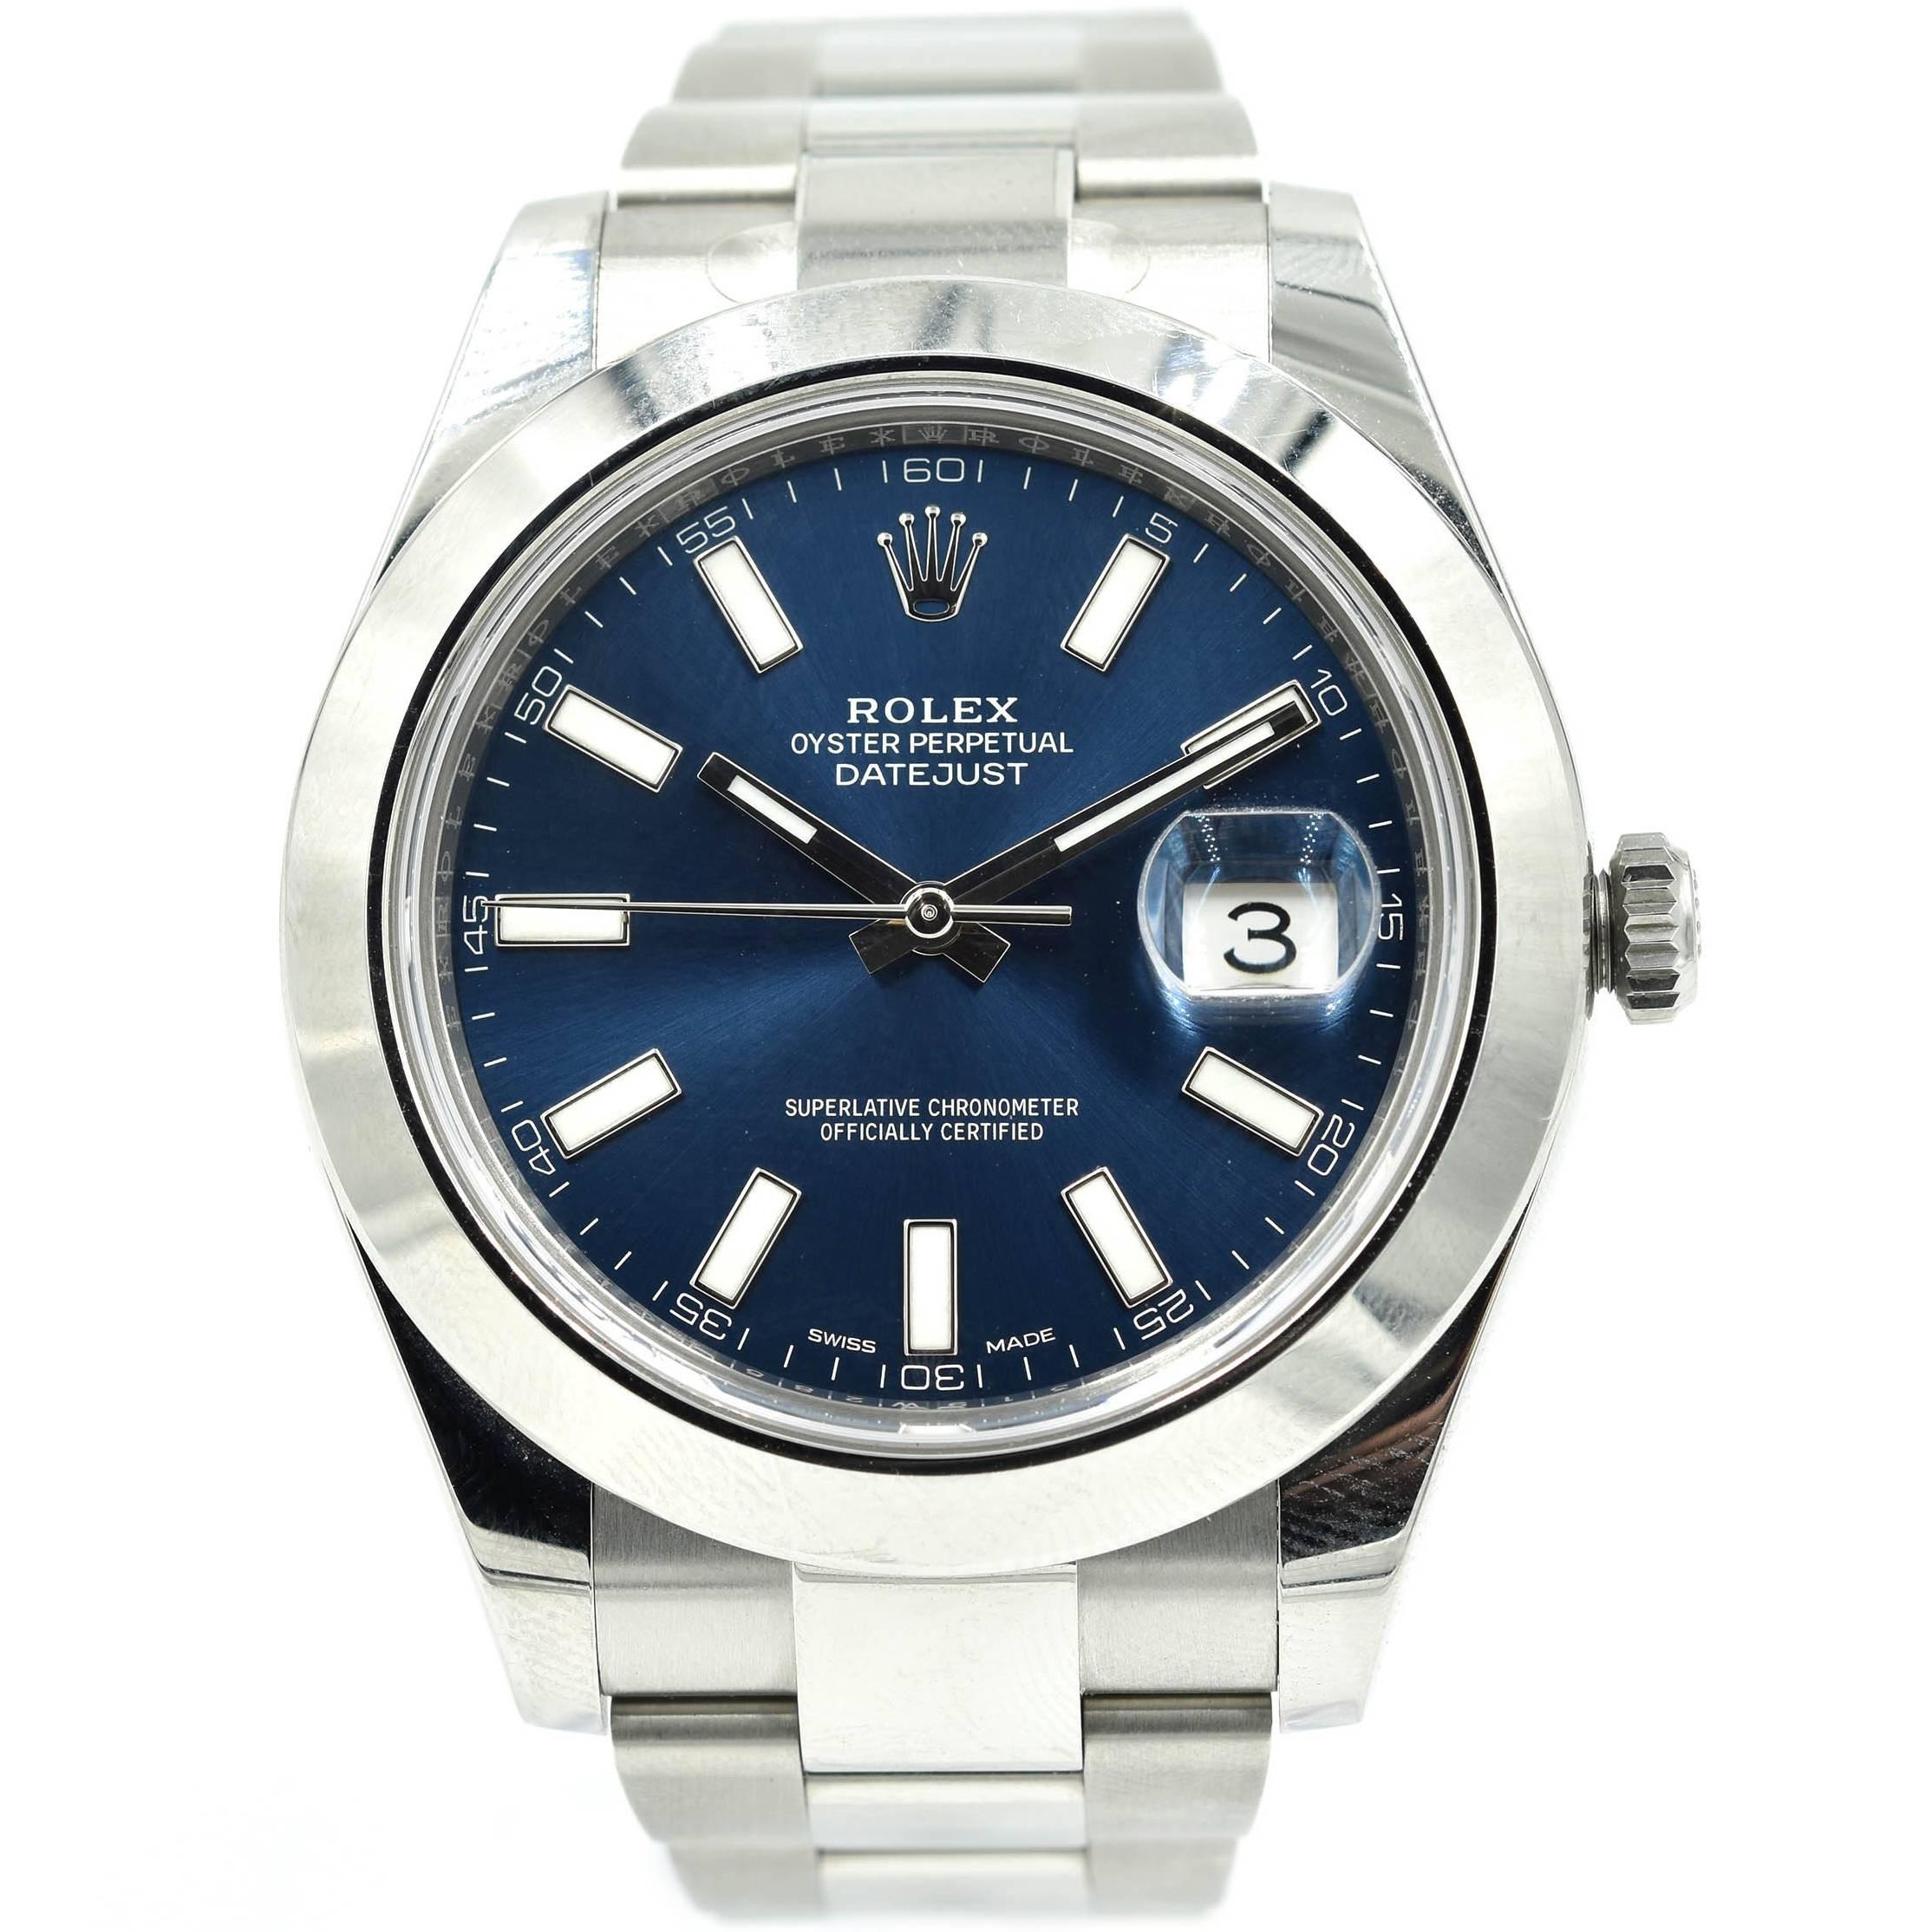 Rolex Stainless Steel Datejust II Blue Dial Oyster Automatic Wristwatch